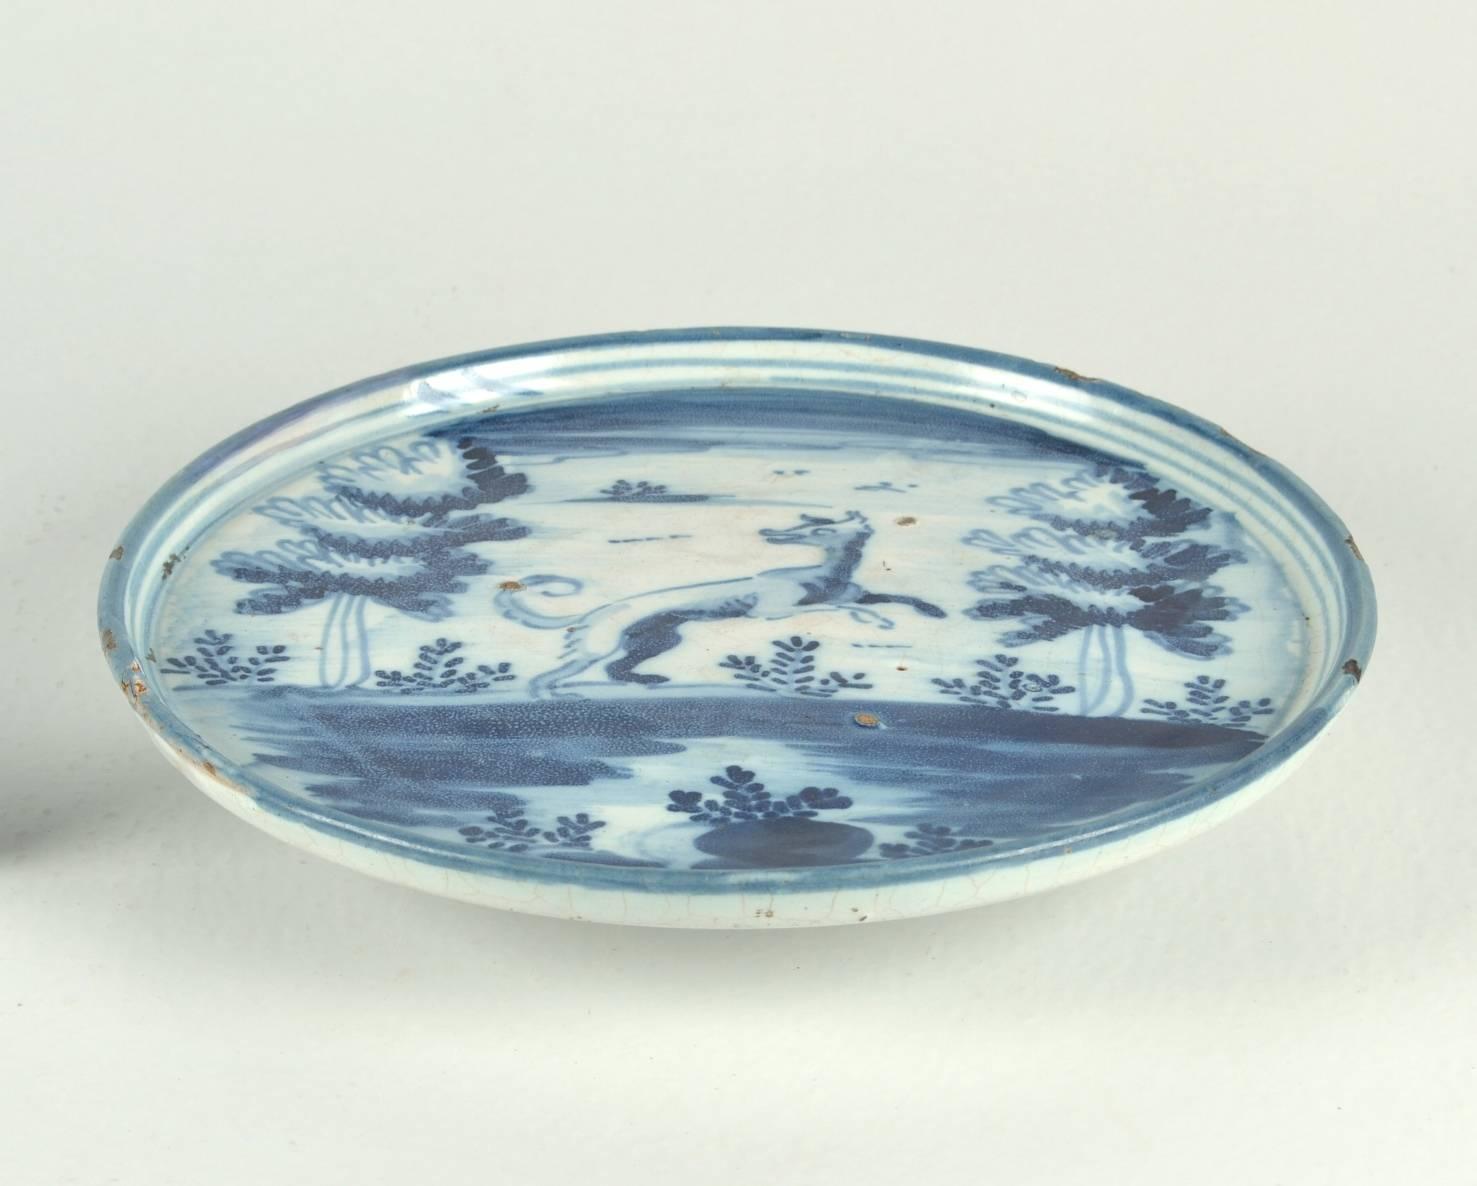 Blue and white Spanish Majolica compote (tazza) painted with a prancing creature (dog?) in a landscape with trees and shrubs.

The village of Talavera de la Reina, in present day Toledo, has been noted for its earthenware since the middle of the